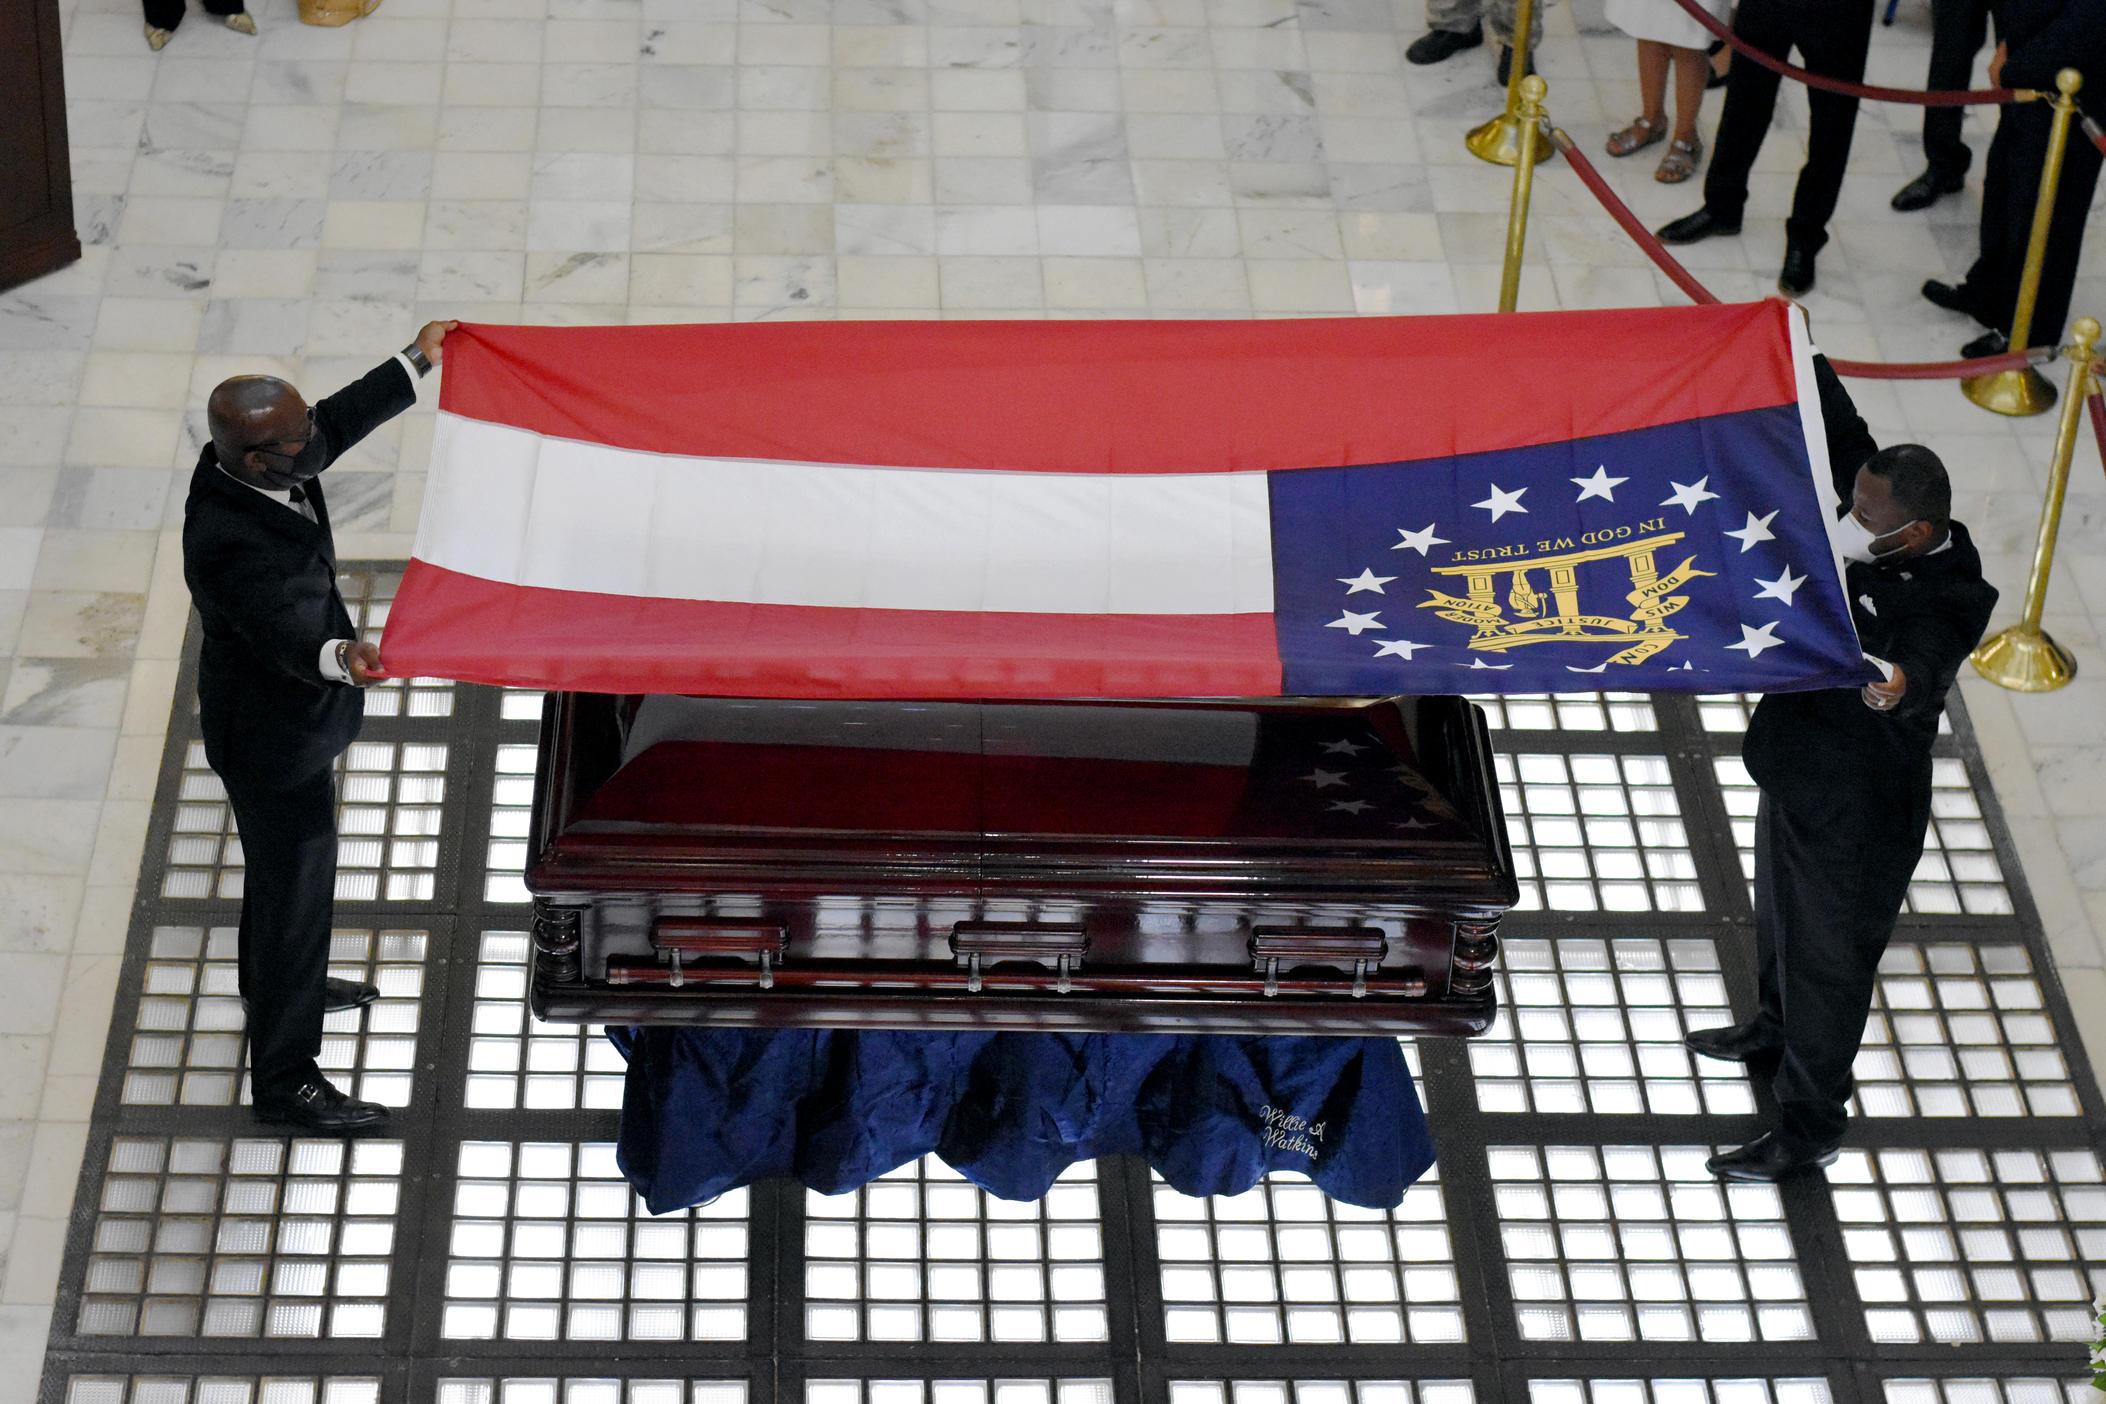 The late civil rights leader C.T. Vivian lies in state at the Georgia State Capitol before his funeral in Atlanta.